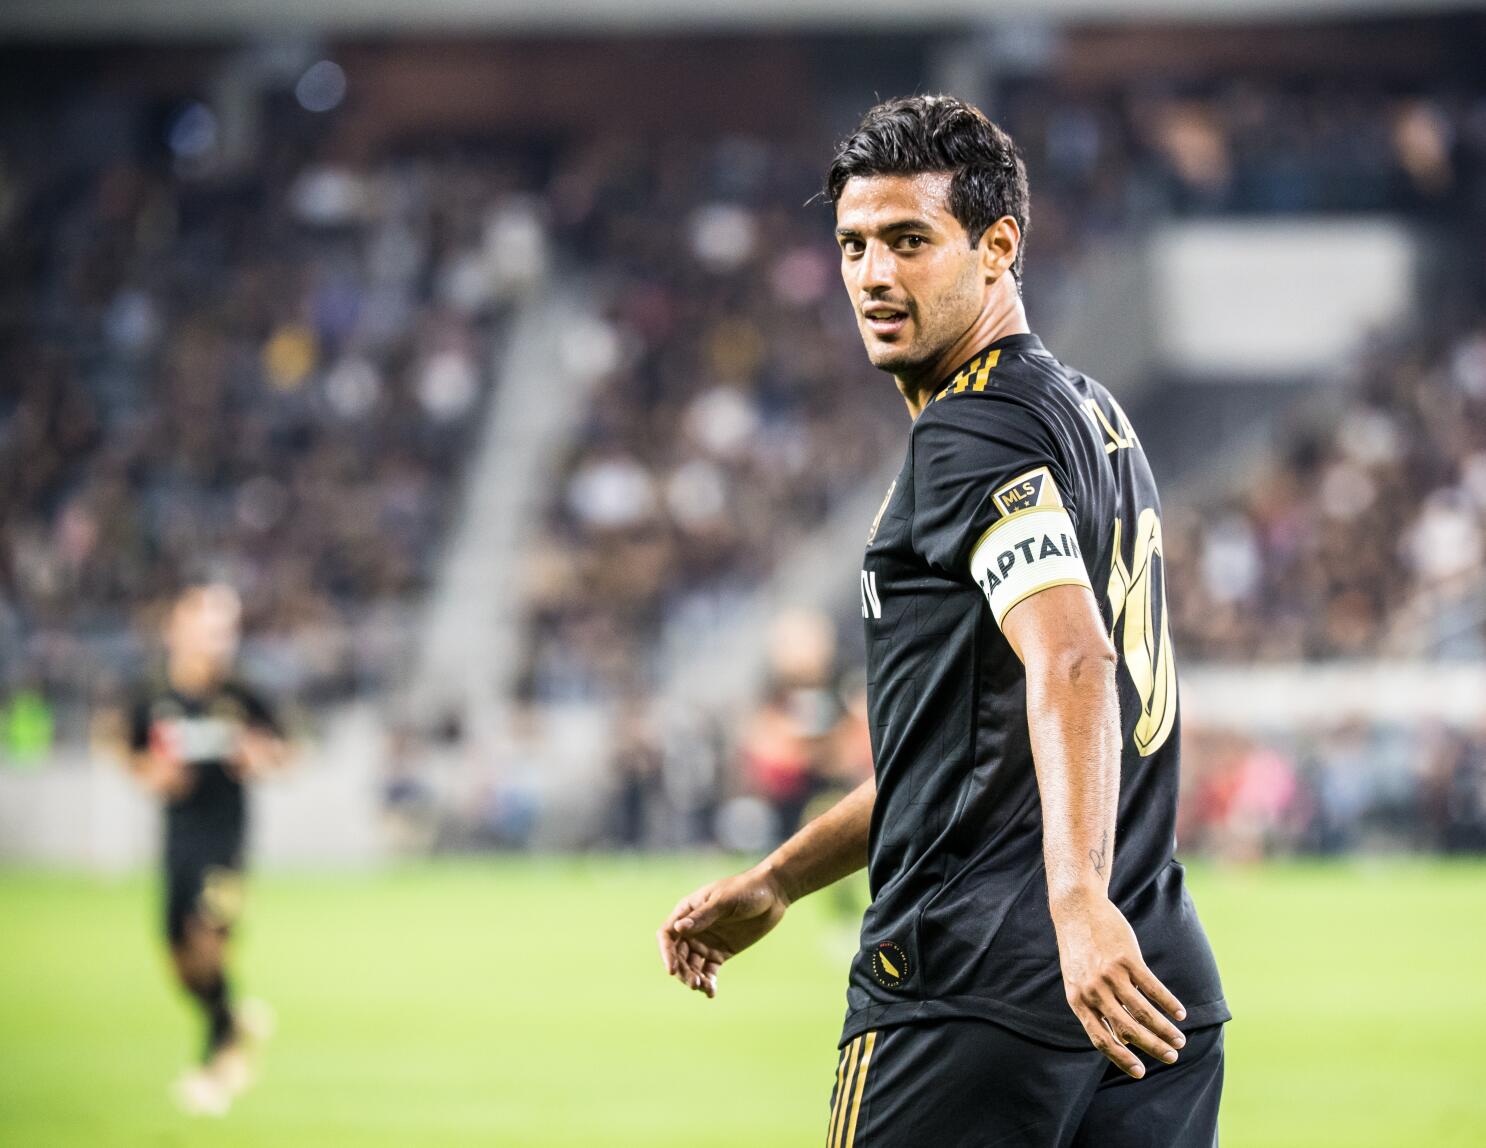 What does Carlos Vela's LAFC need to do to reach the 2023